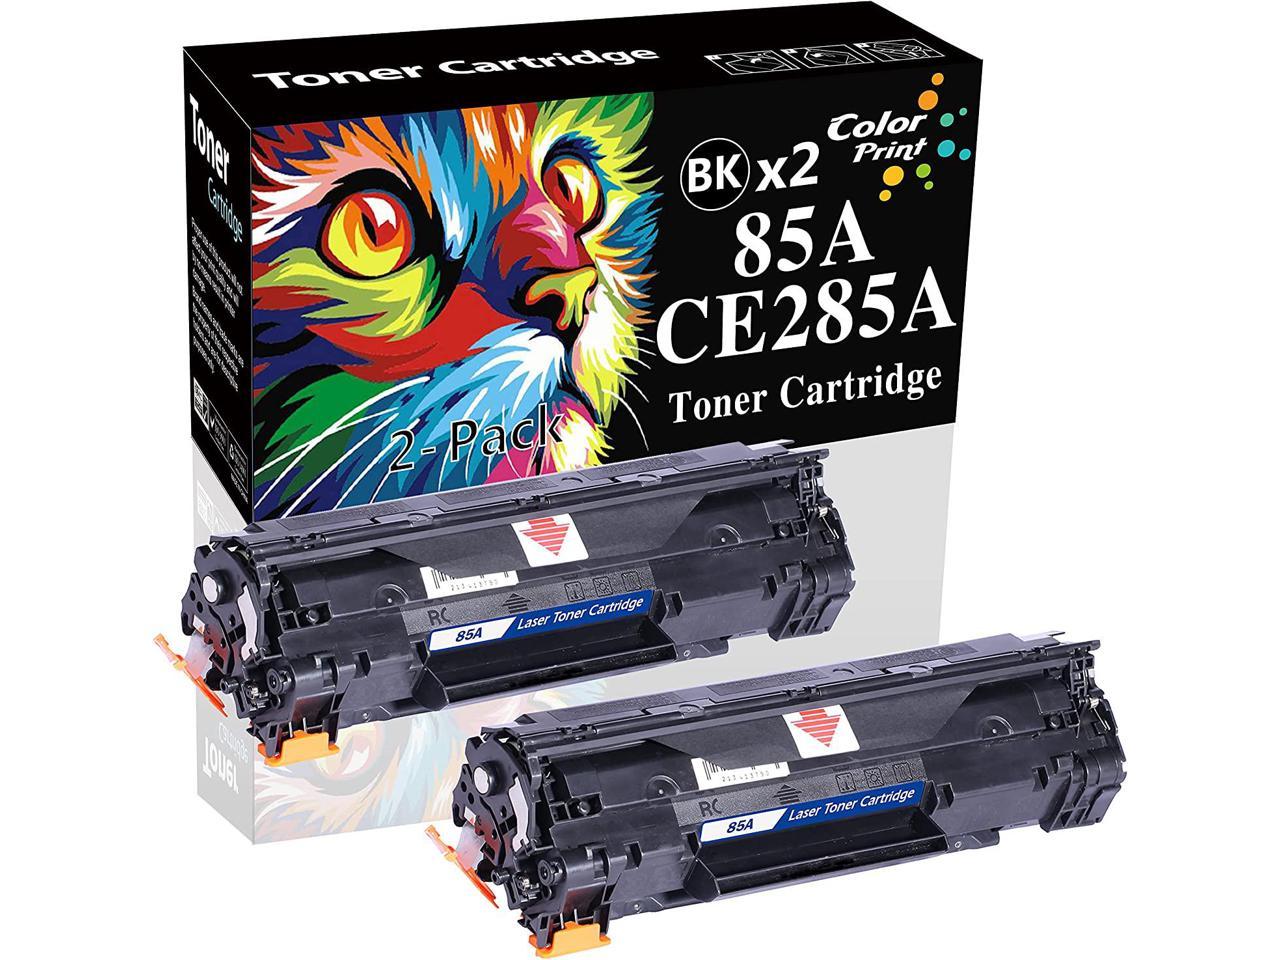 Nozaya Compatible Toner Cartridge Replacement for HP CE285A 85A Black, 1-Pack